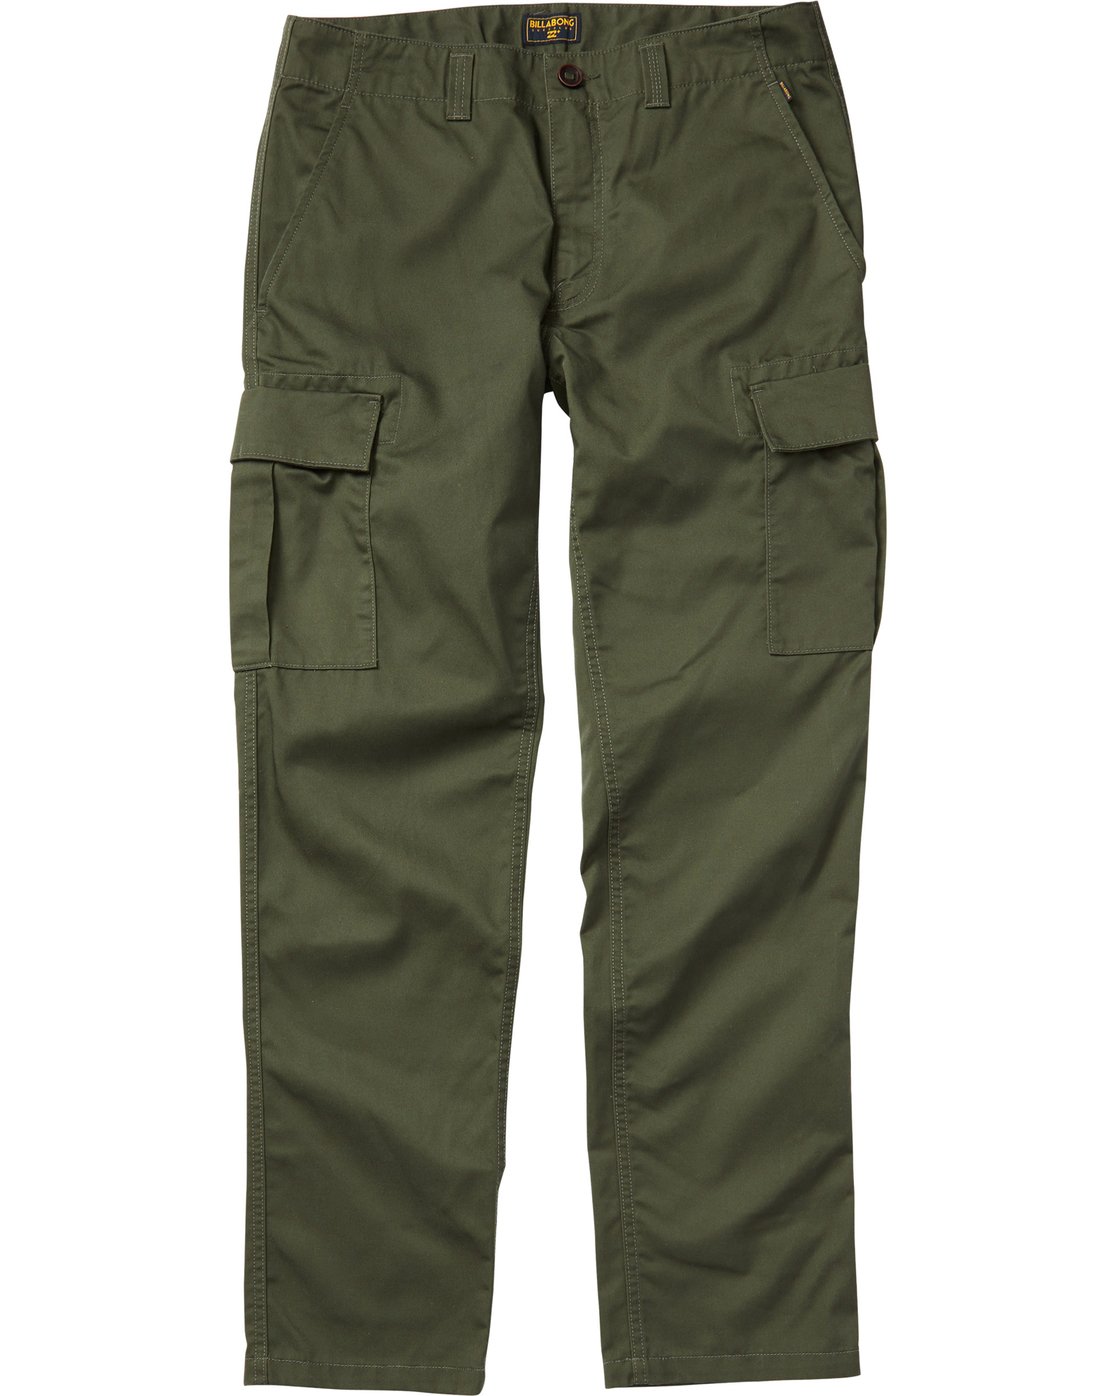 mens cargo pants clearance